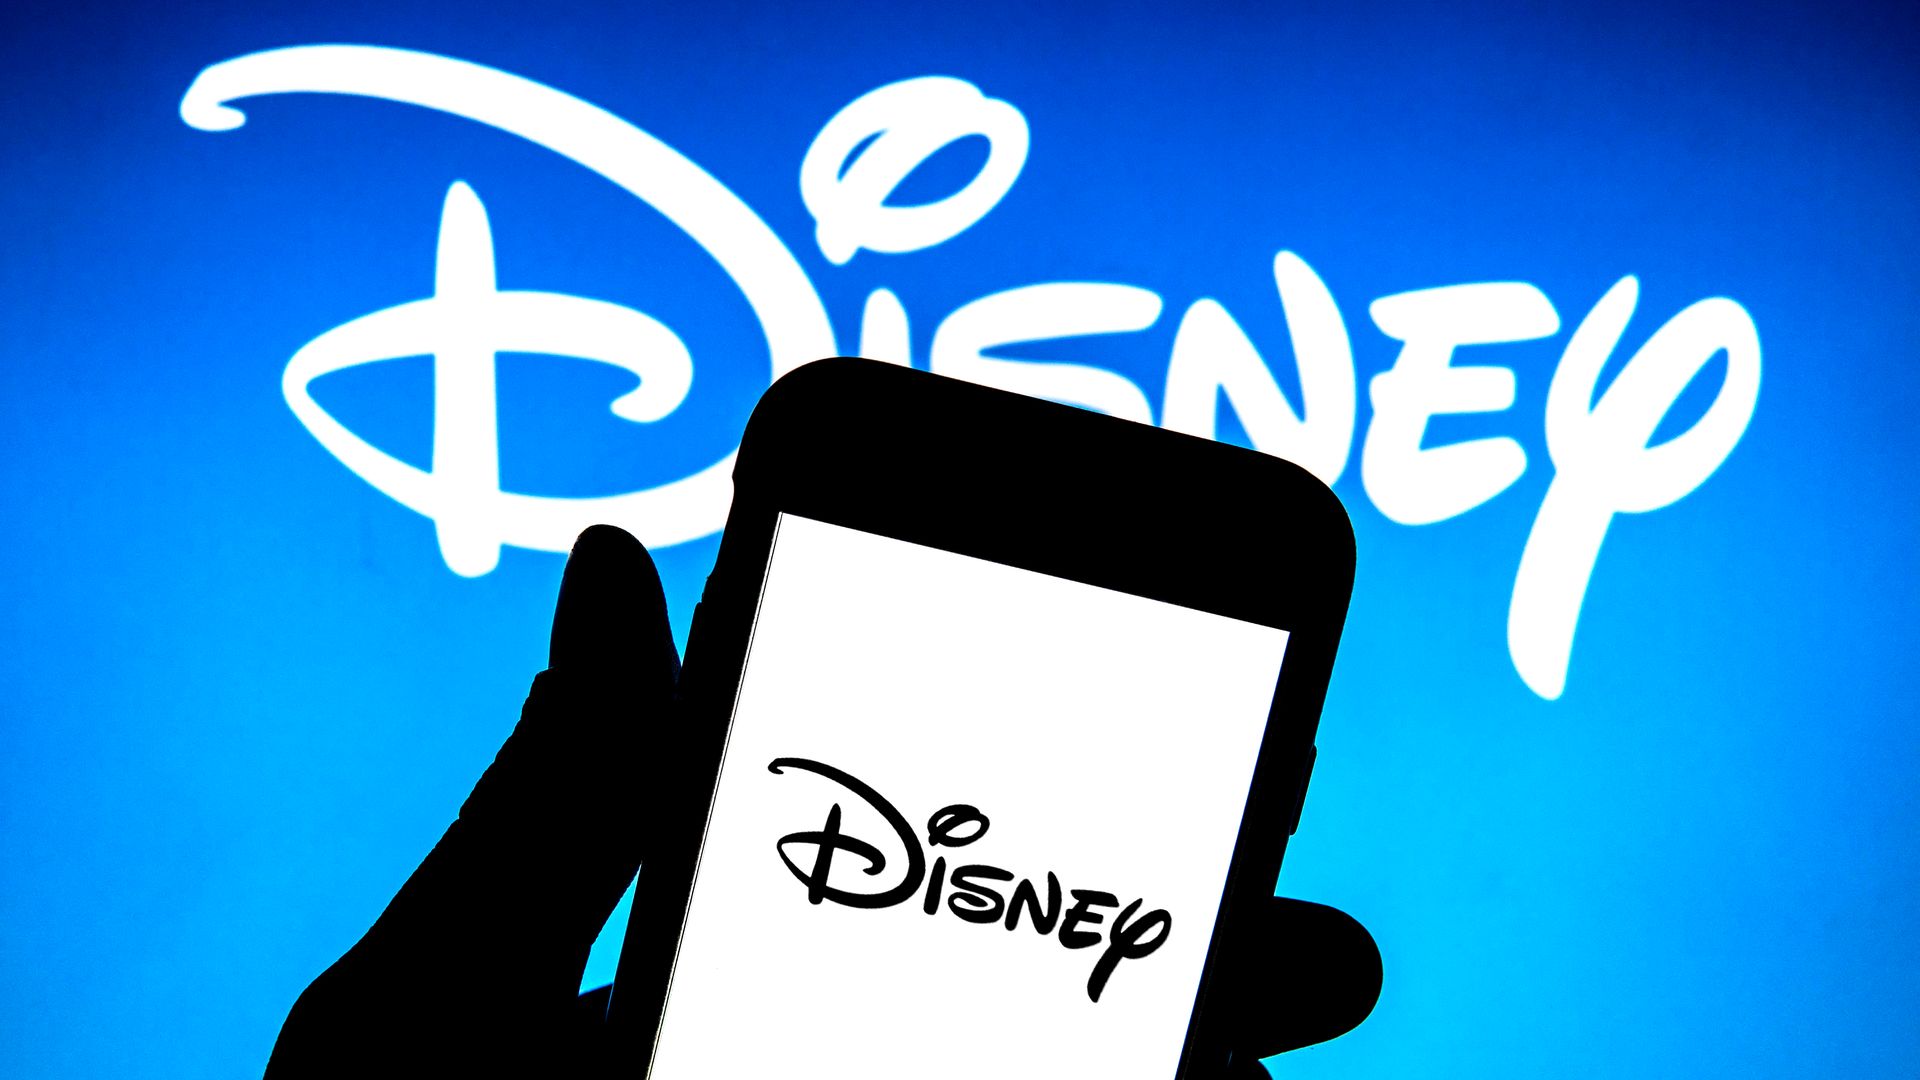 Disney inks major advertising deal with The Trade Desk